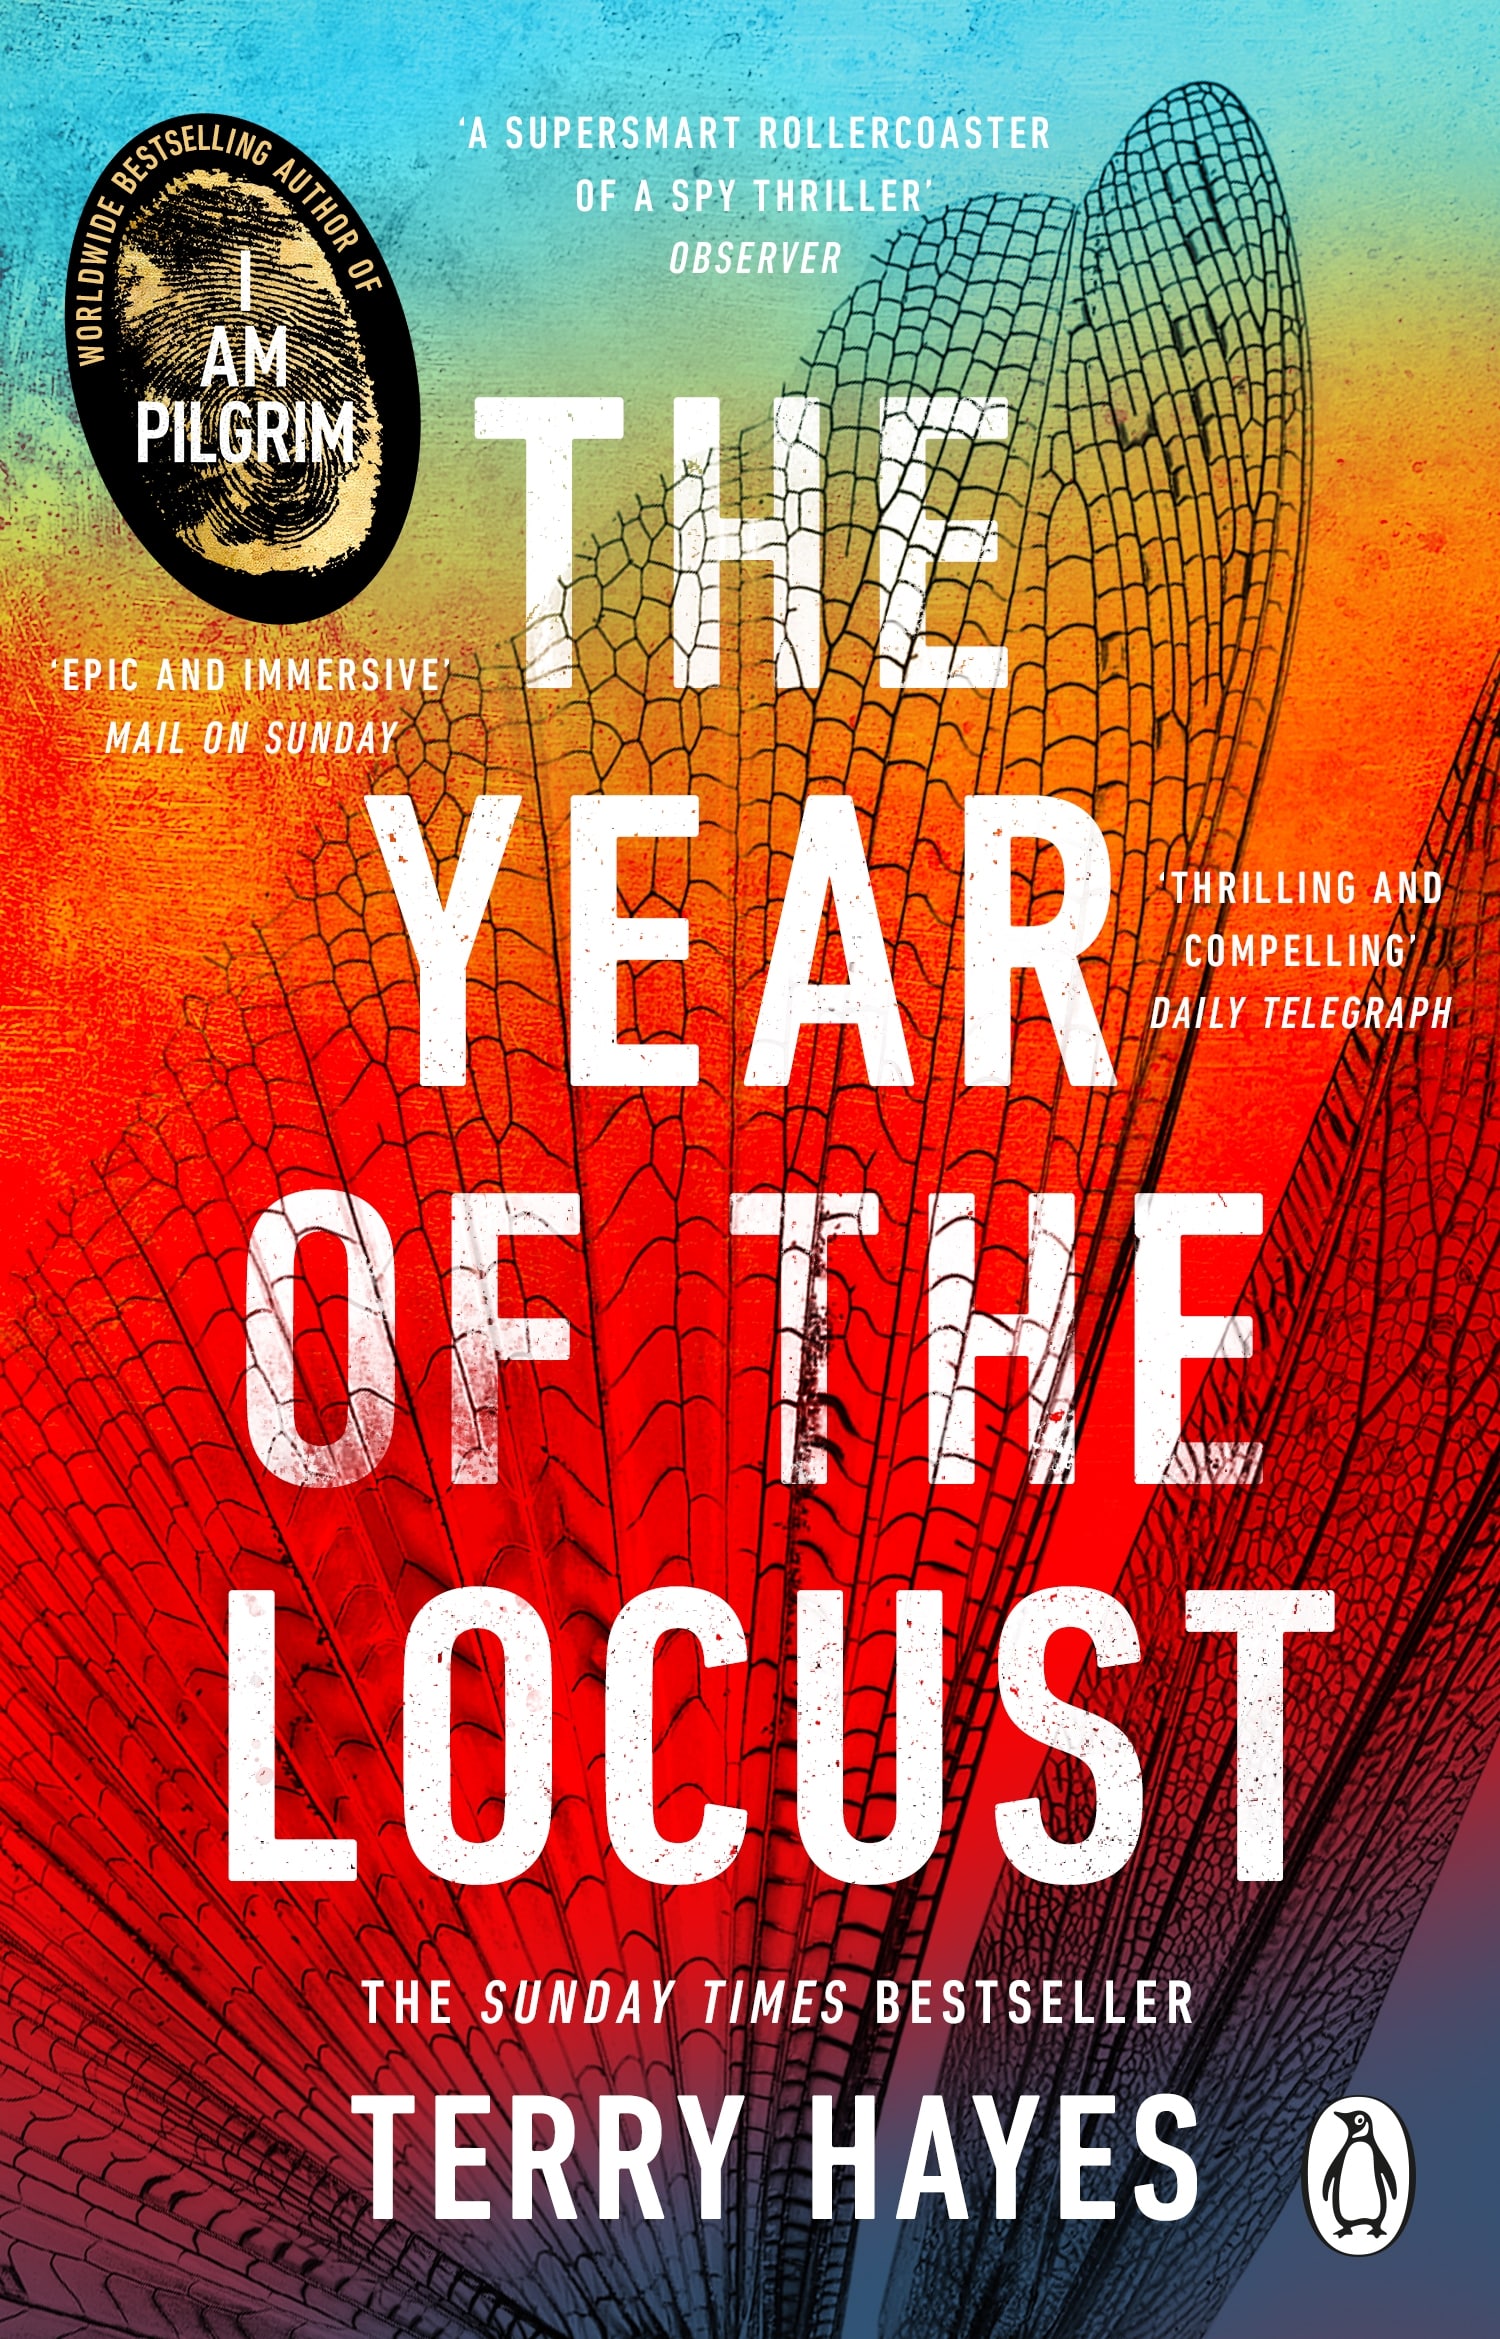 The Year of the Locust by Terry Hayes book cover